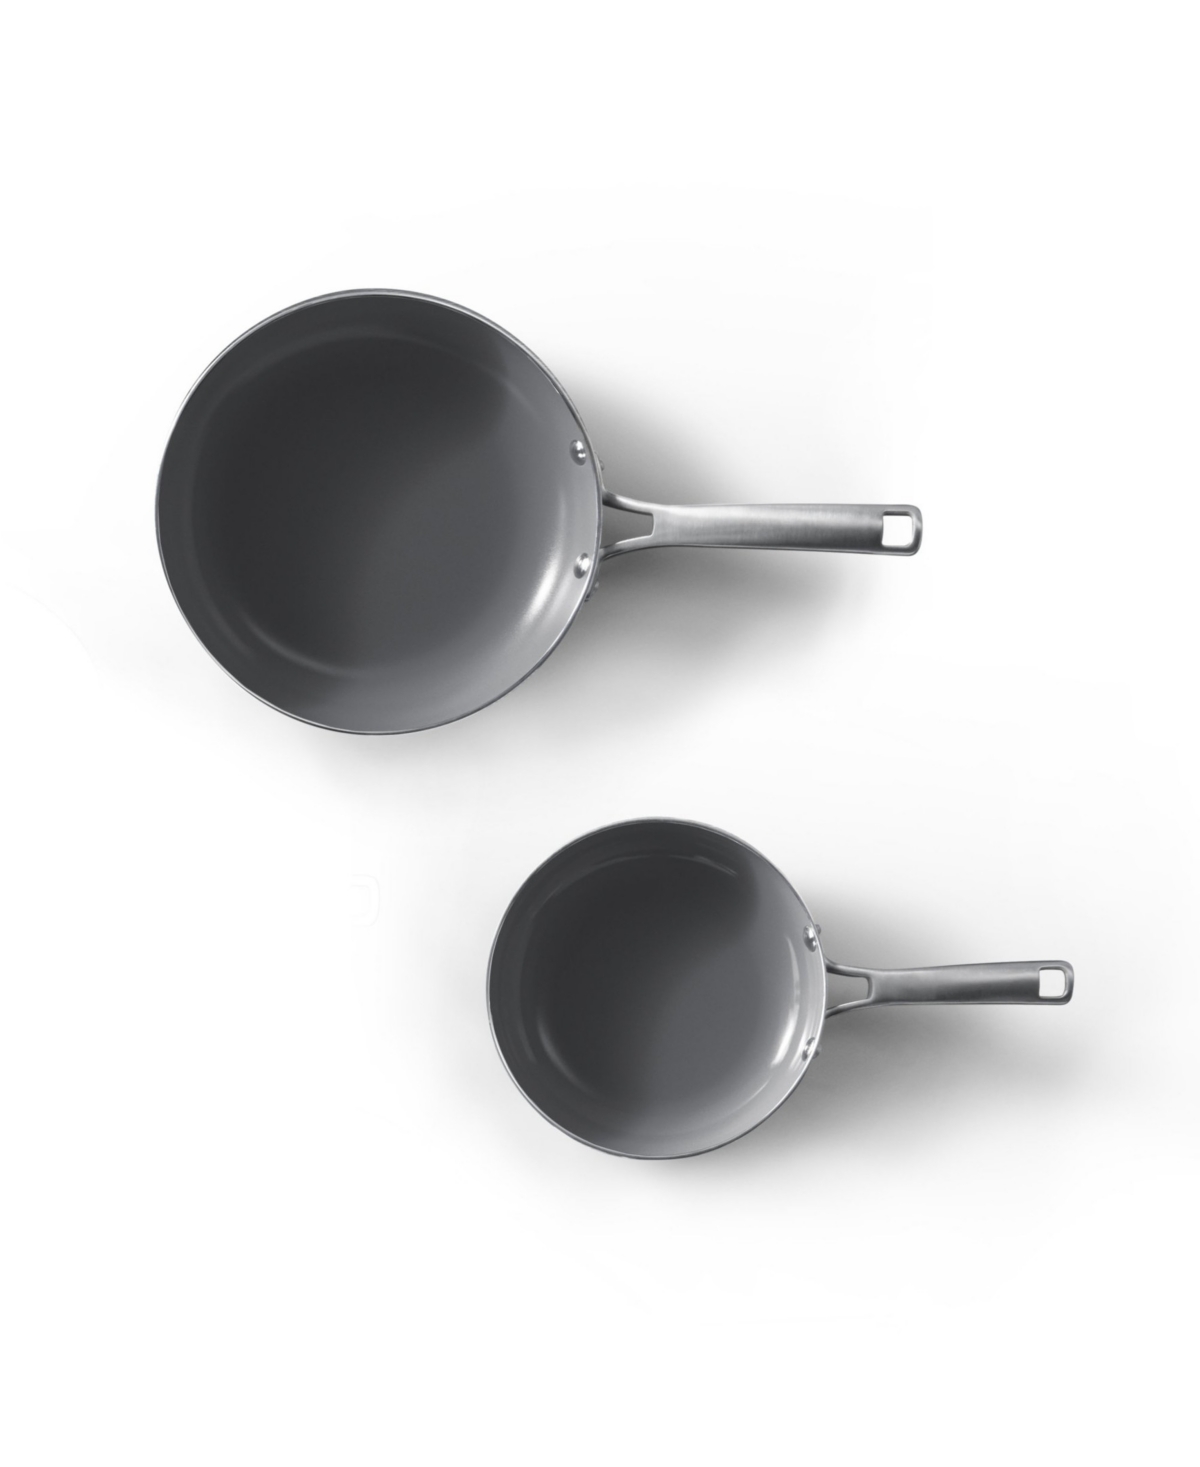 Calphalon Classic Oil Infused Ceramic 2-piece Fry Pan Set In Black